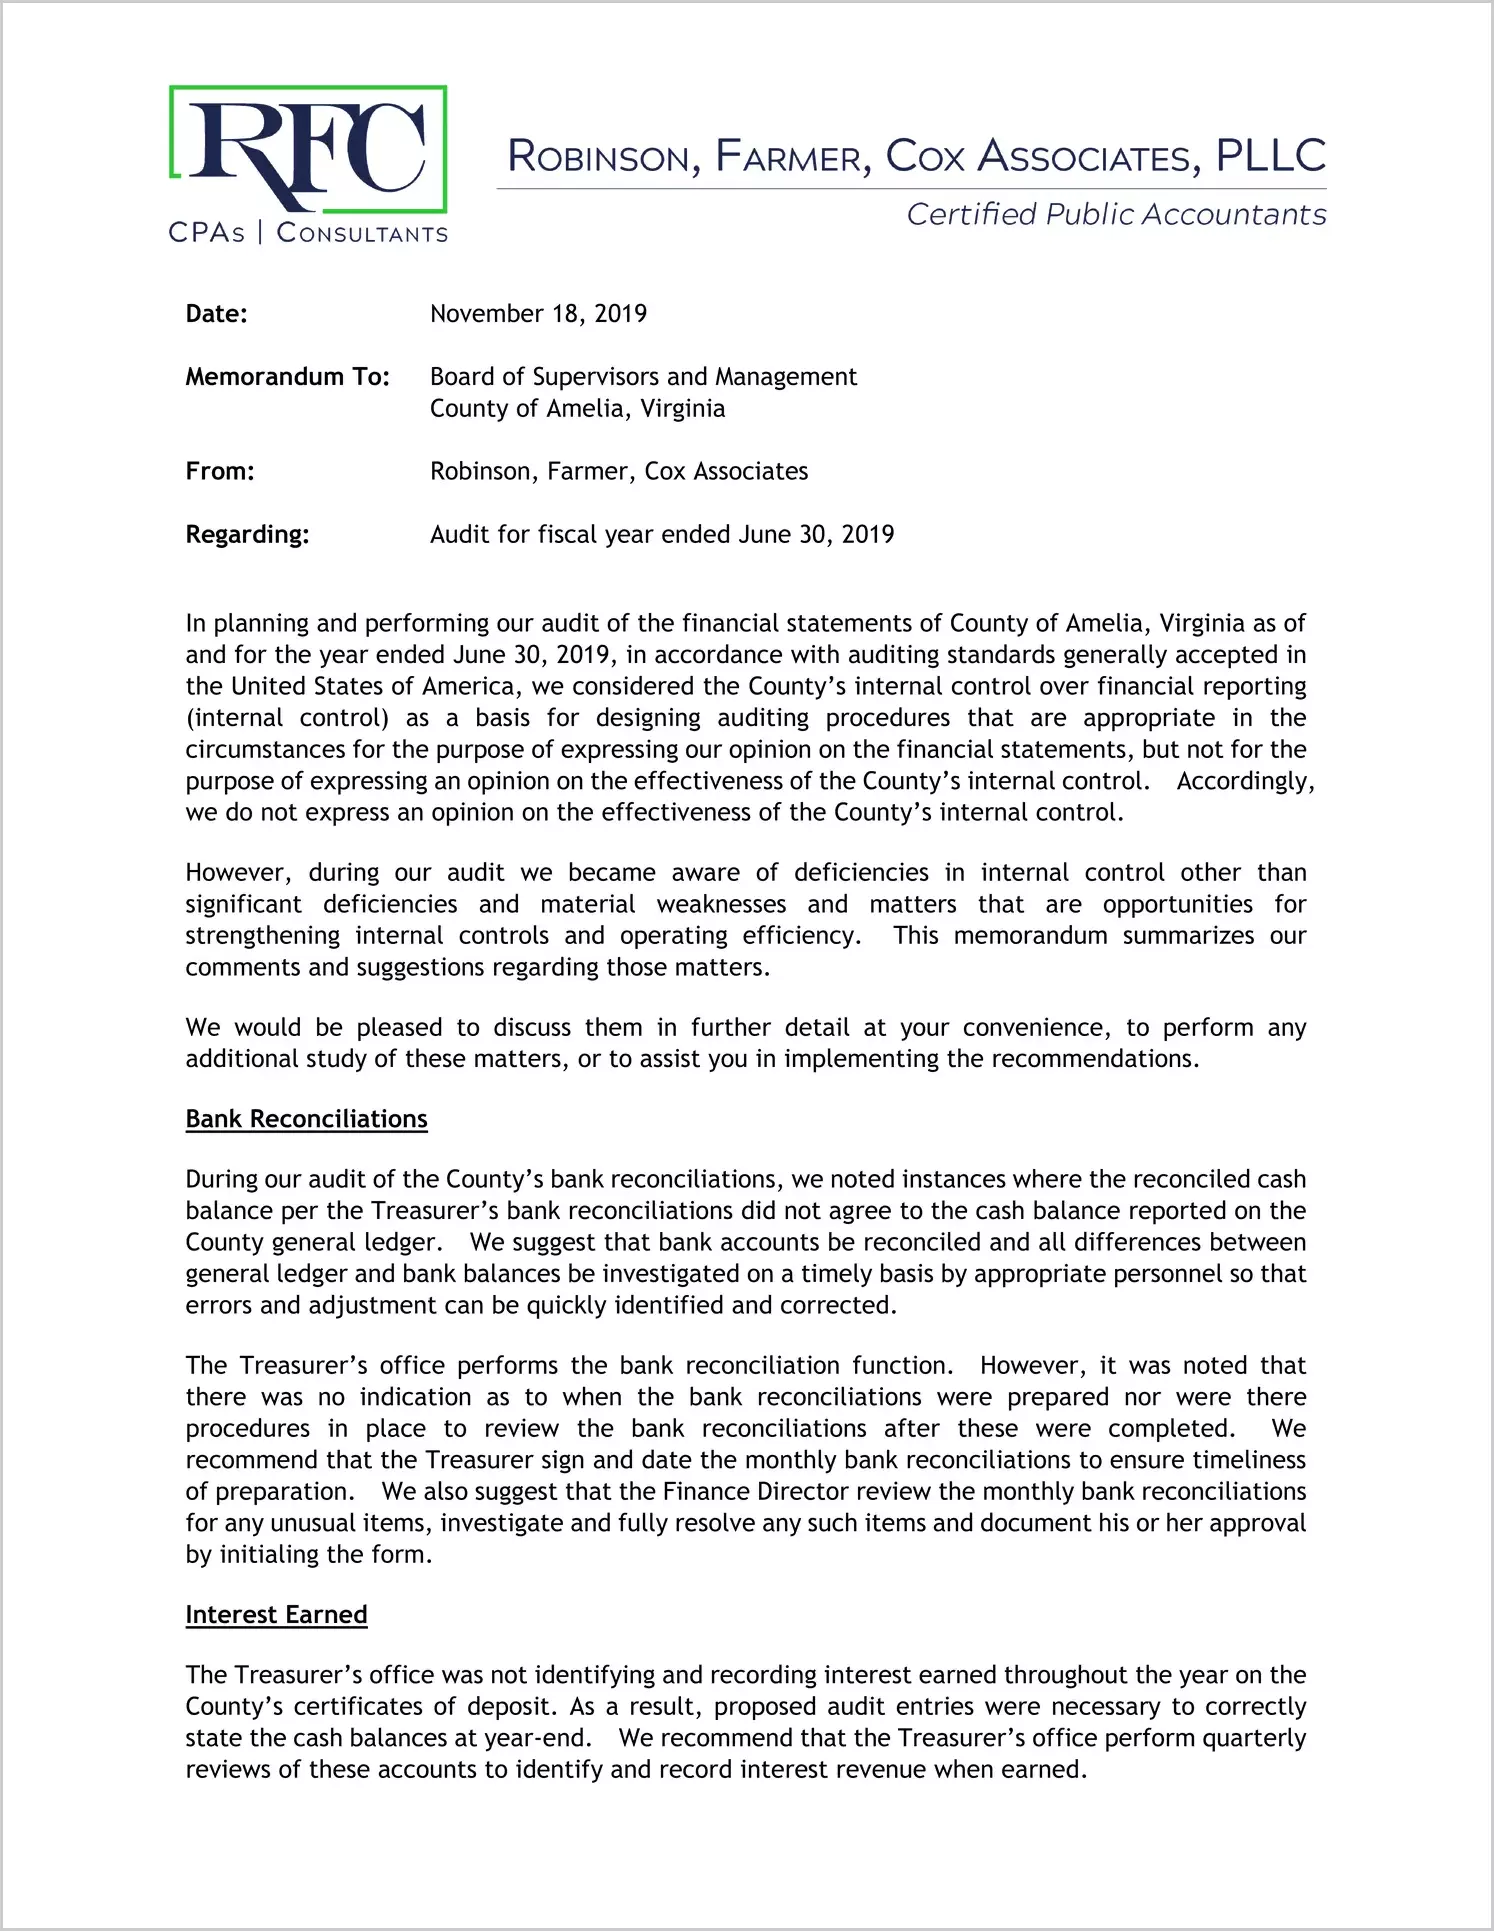 2019 Management Letter for County of Amelia